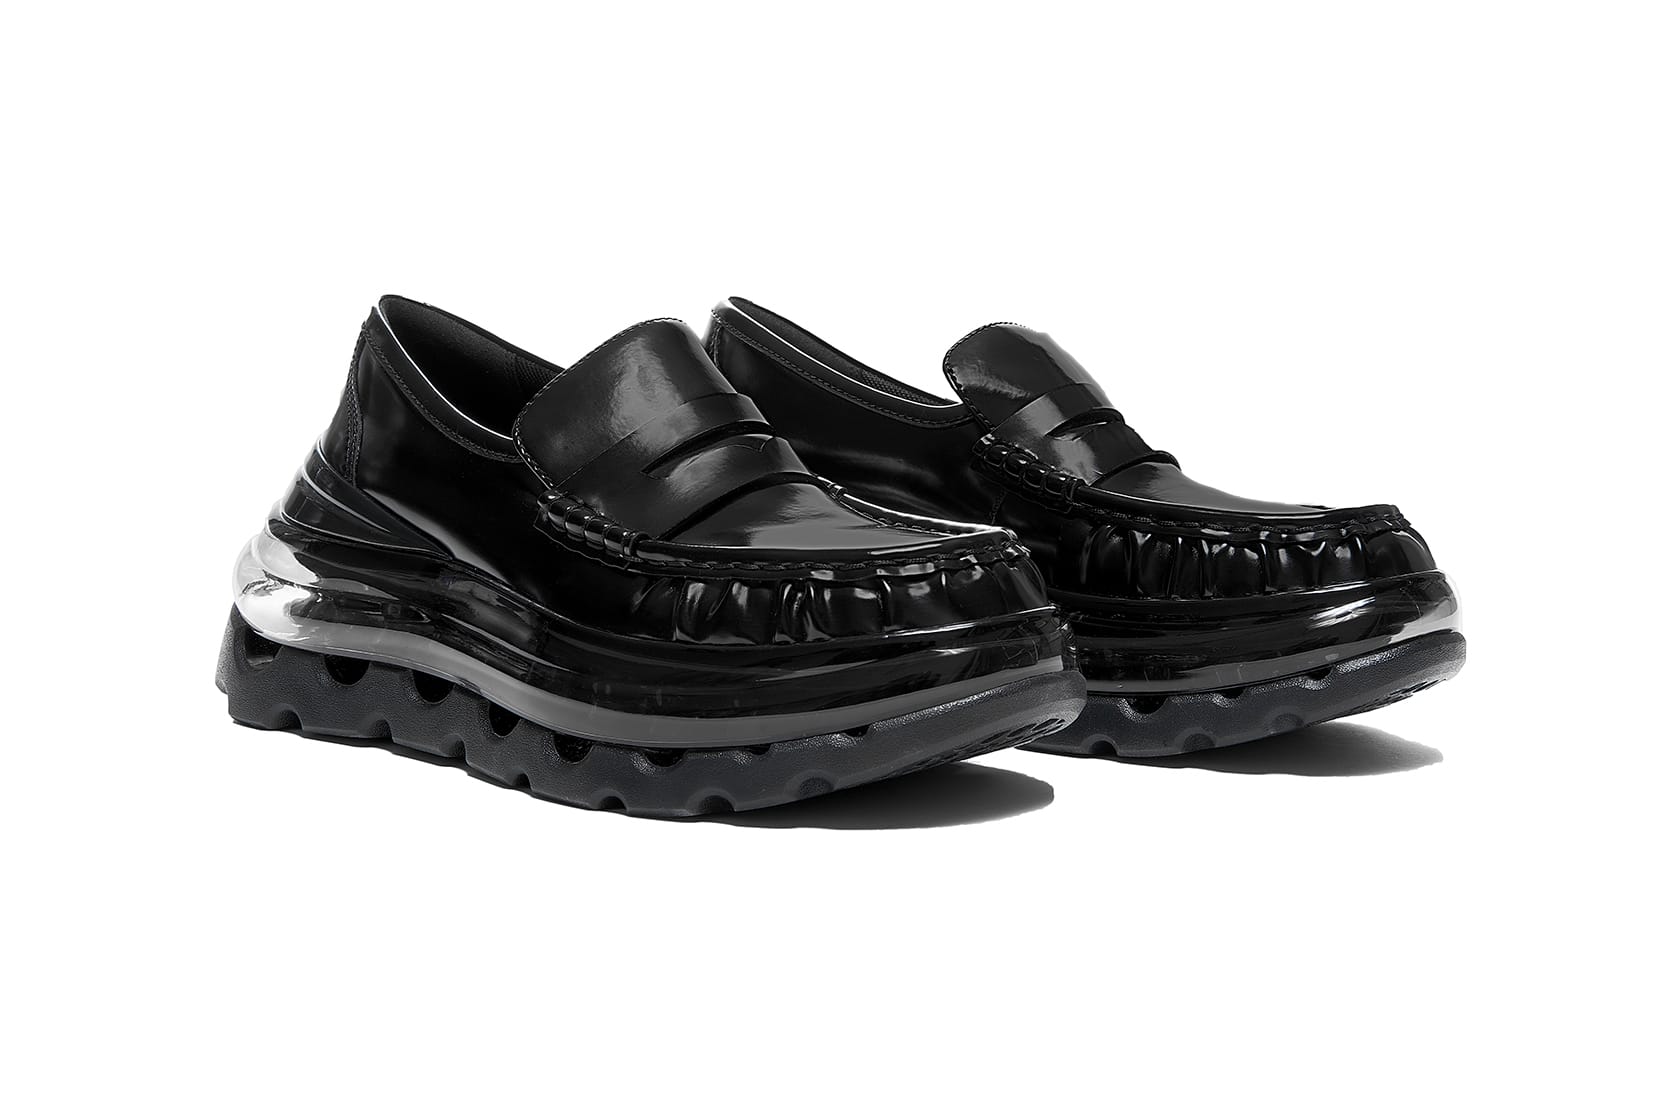 Remarkable Black Friday Deals on Balenciaga Triple S Low